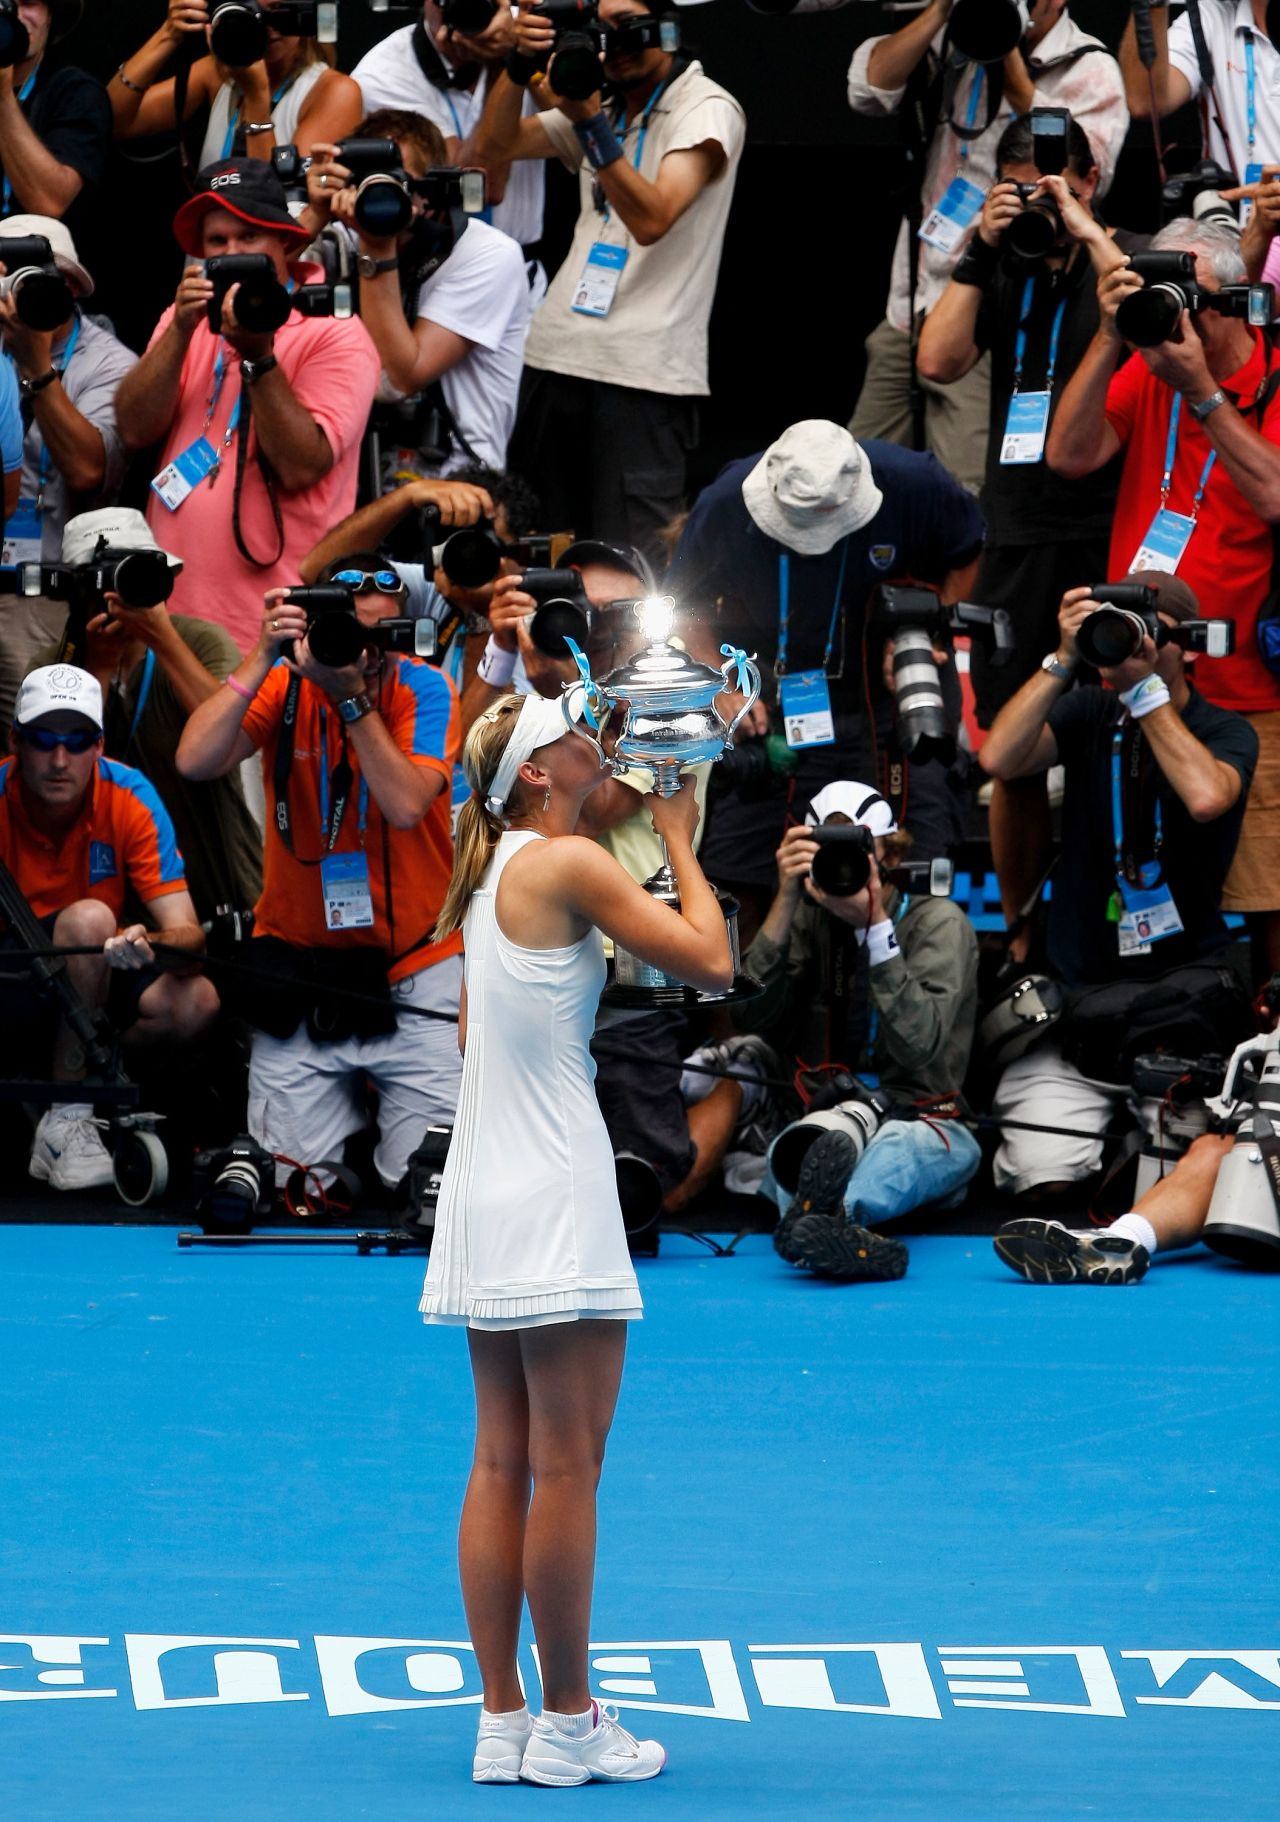 The 25-year-old made it a hat-trick of grand slam victories at the 2008 Australian Open and in some style. She didn't drop a set in the entire tournament on her way to defeating Serbia's Ana Ivanovic in the final.